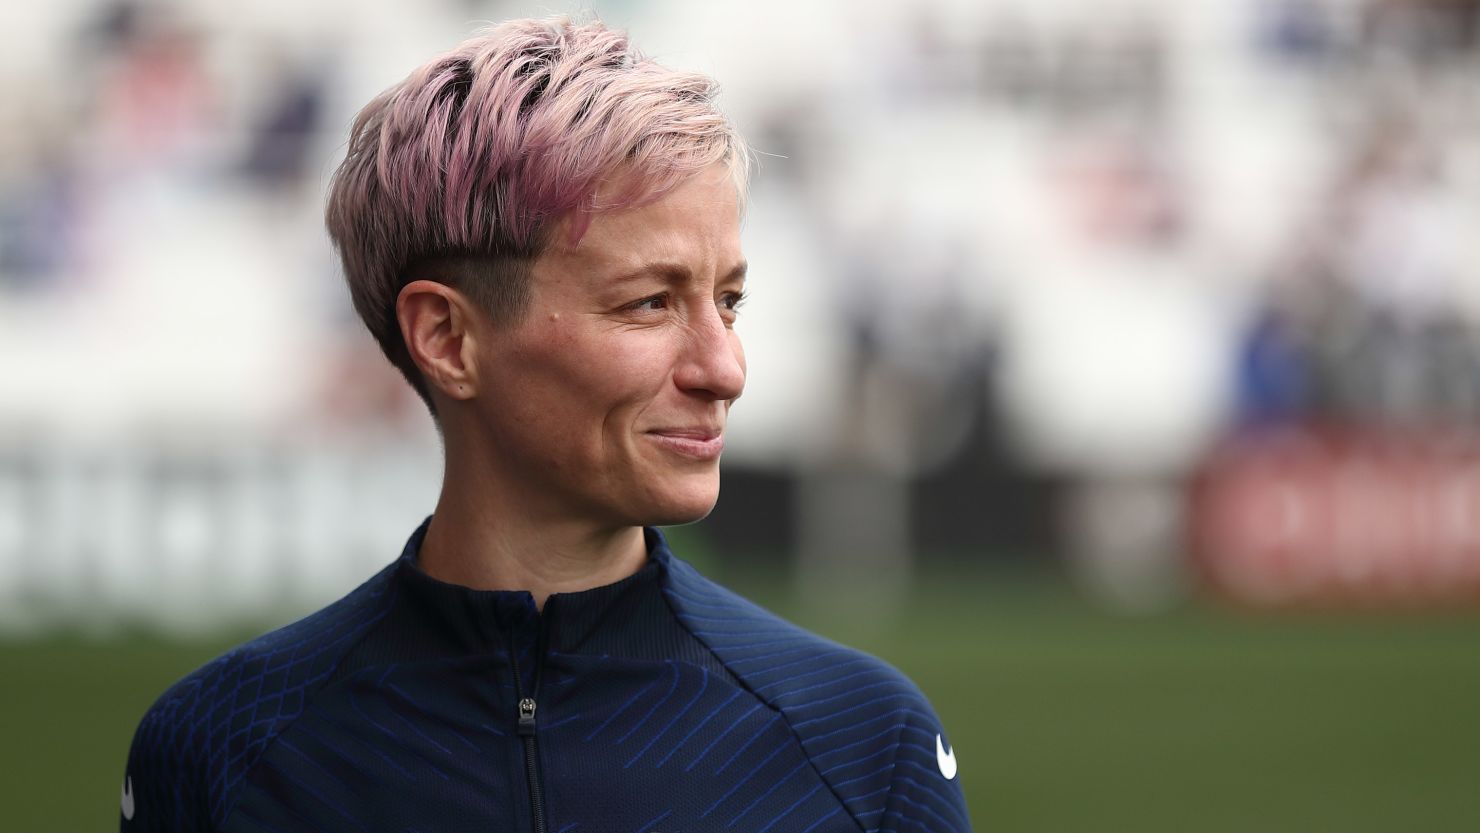 Rapinoe said what the team is "most proud of is that it's been something that people can see themselves in and gain confidence from." 